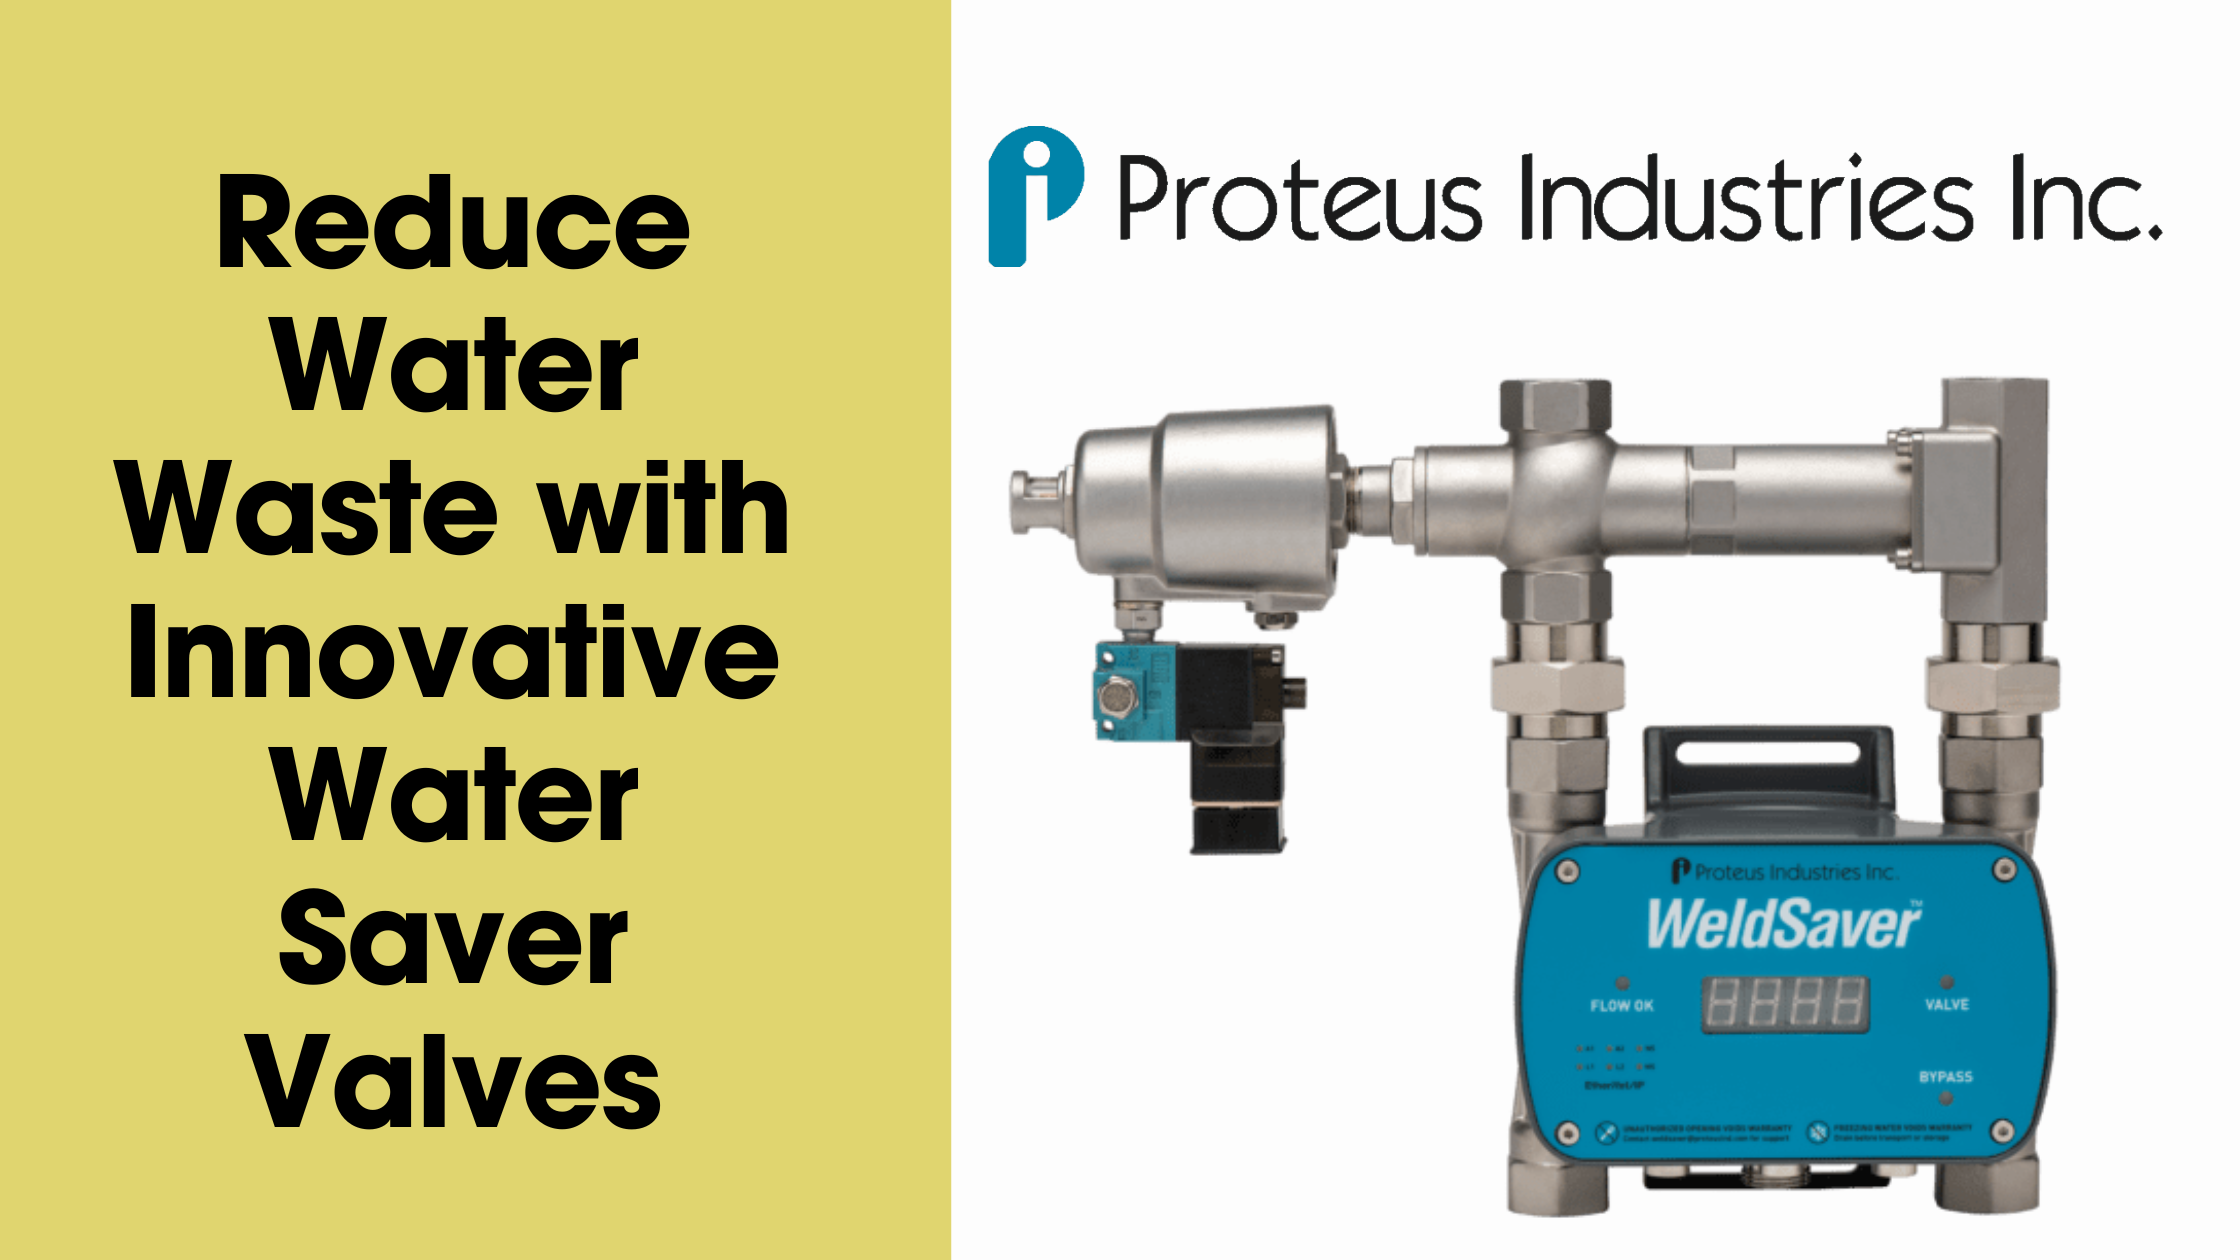 Reduce Water Waste with Innovative Water Saver Valves